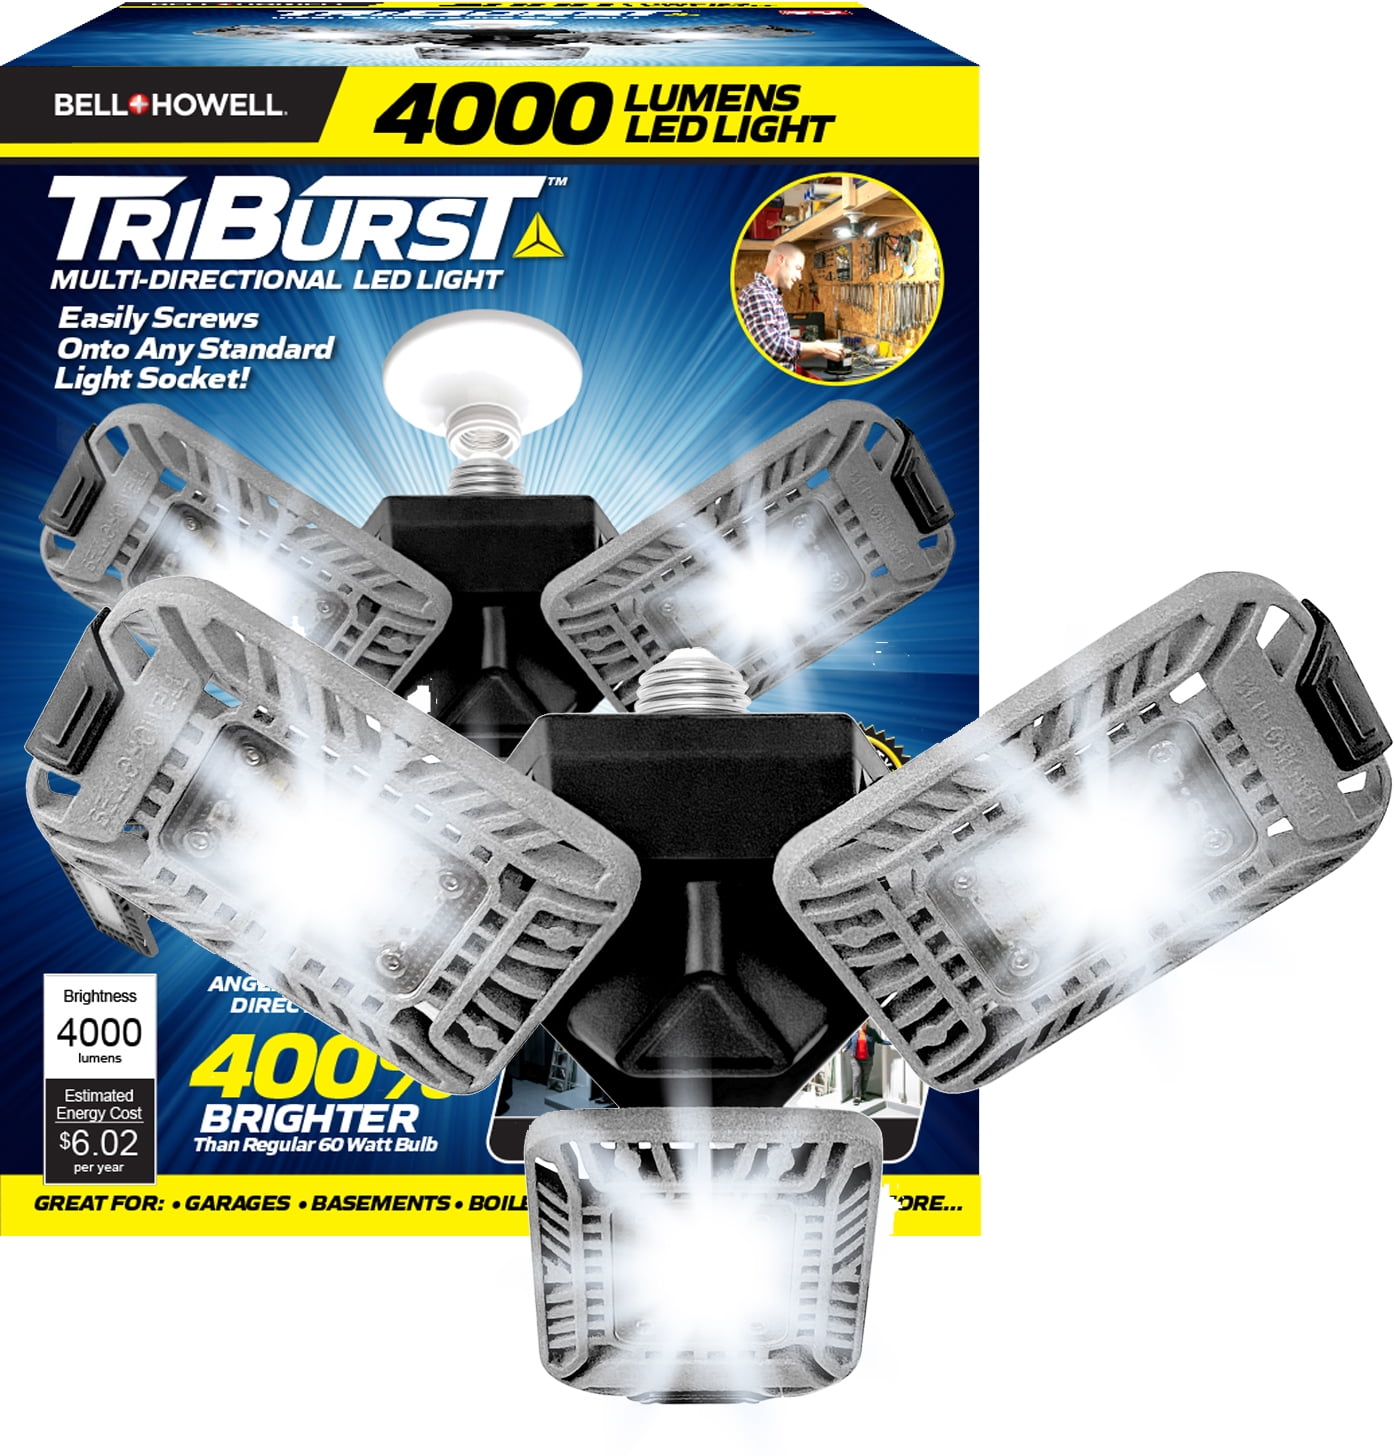 Bell+Howell TriBurst High Intensity Lighting with 144 LED Bulb, Multi-Directional Triple Panel Light for Indoor and Outdoor, Garage Light